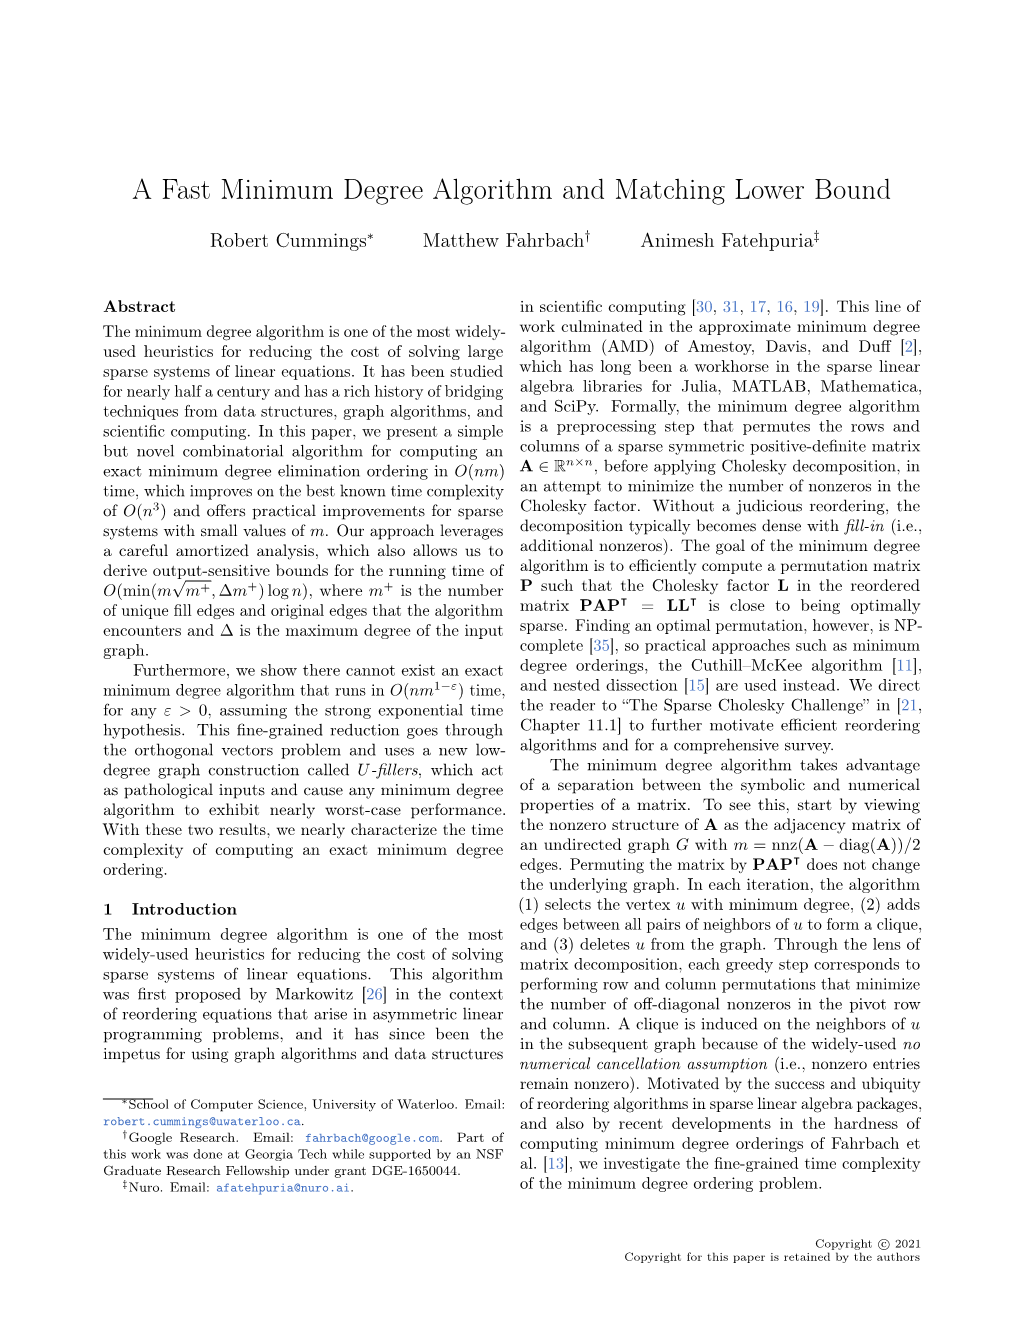 A Fast Minimum Degree Algorithm and Matching Lower Bound